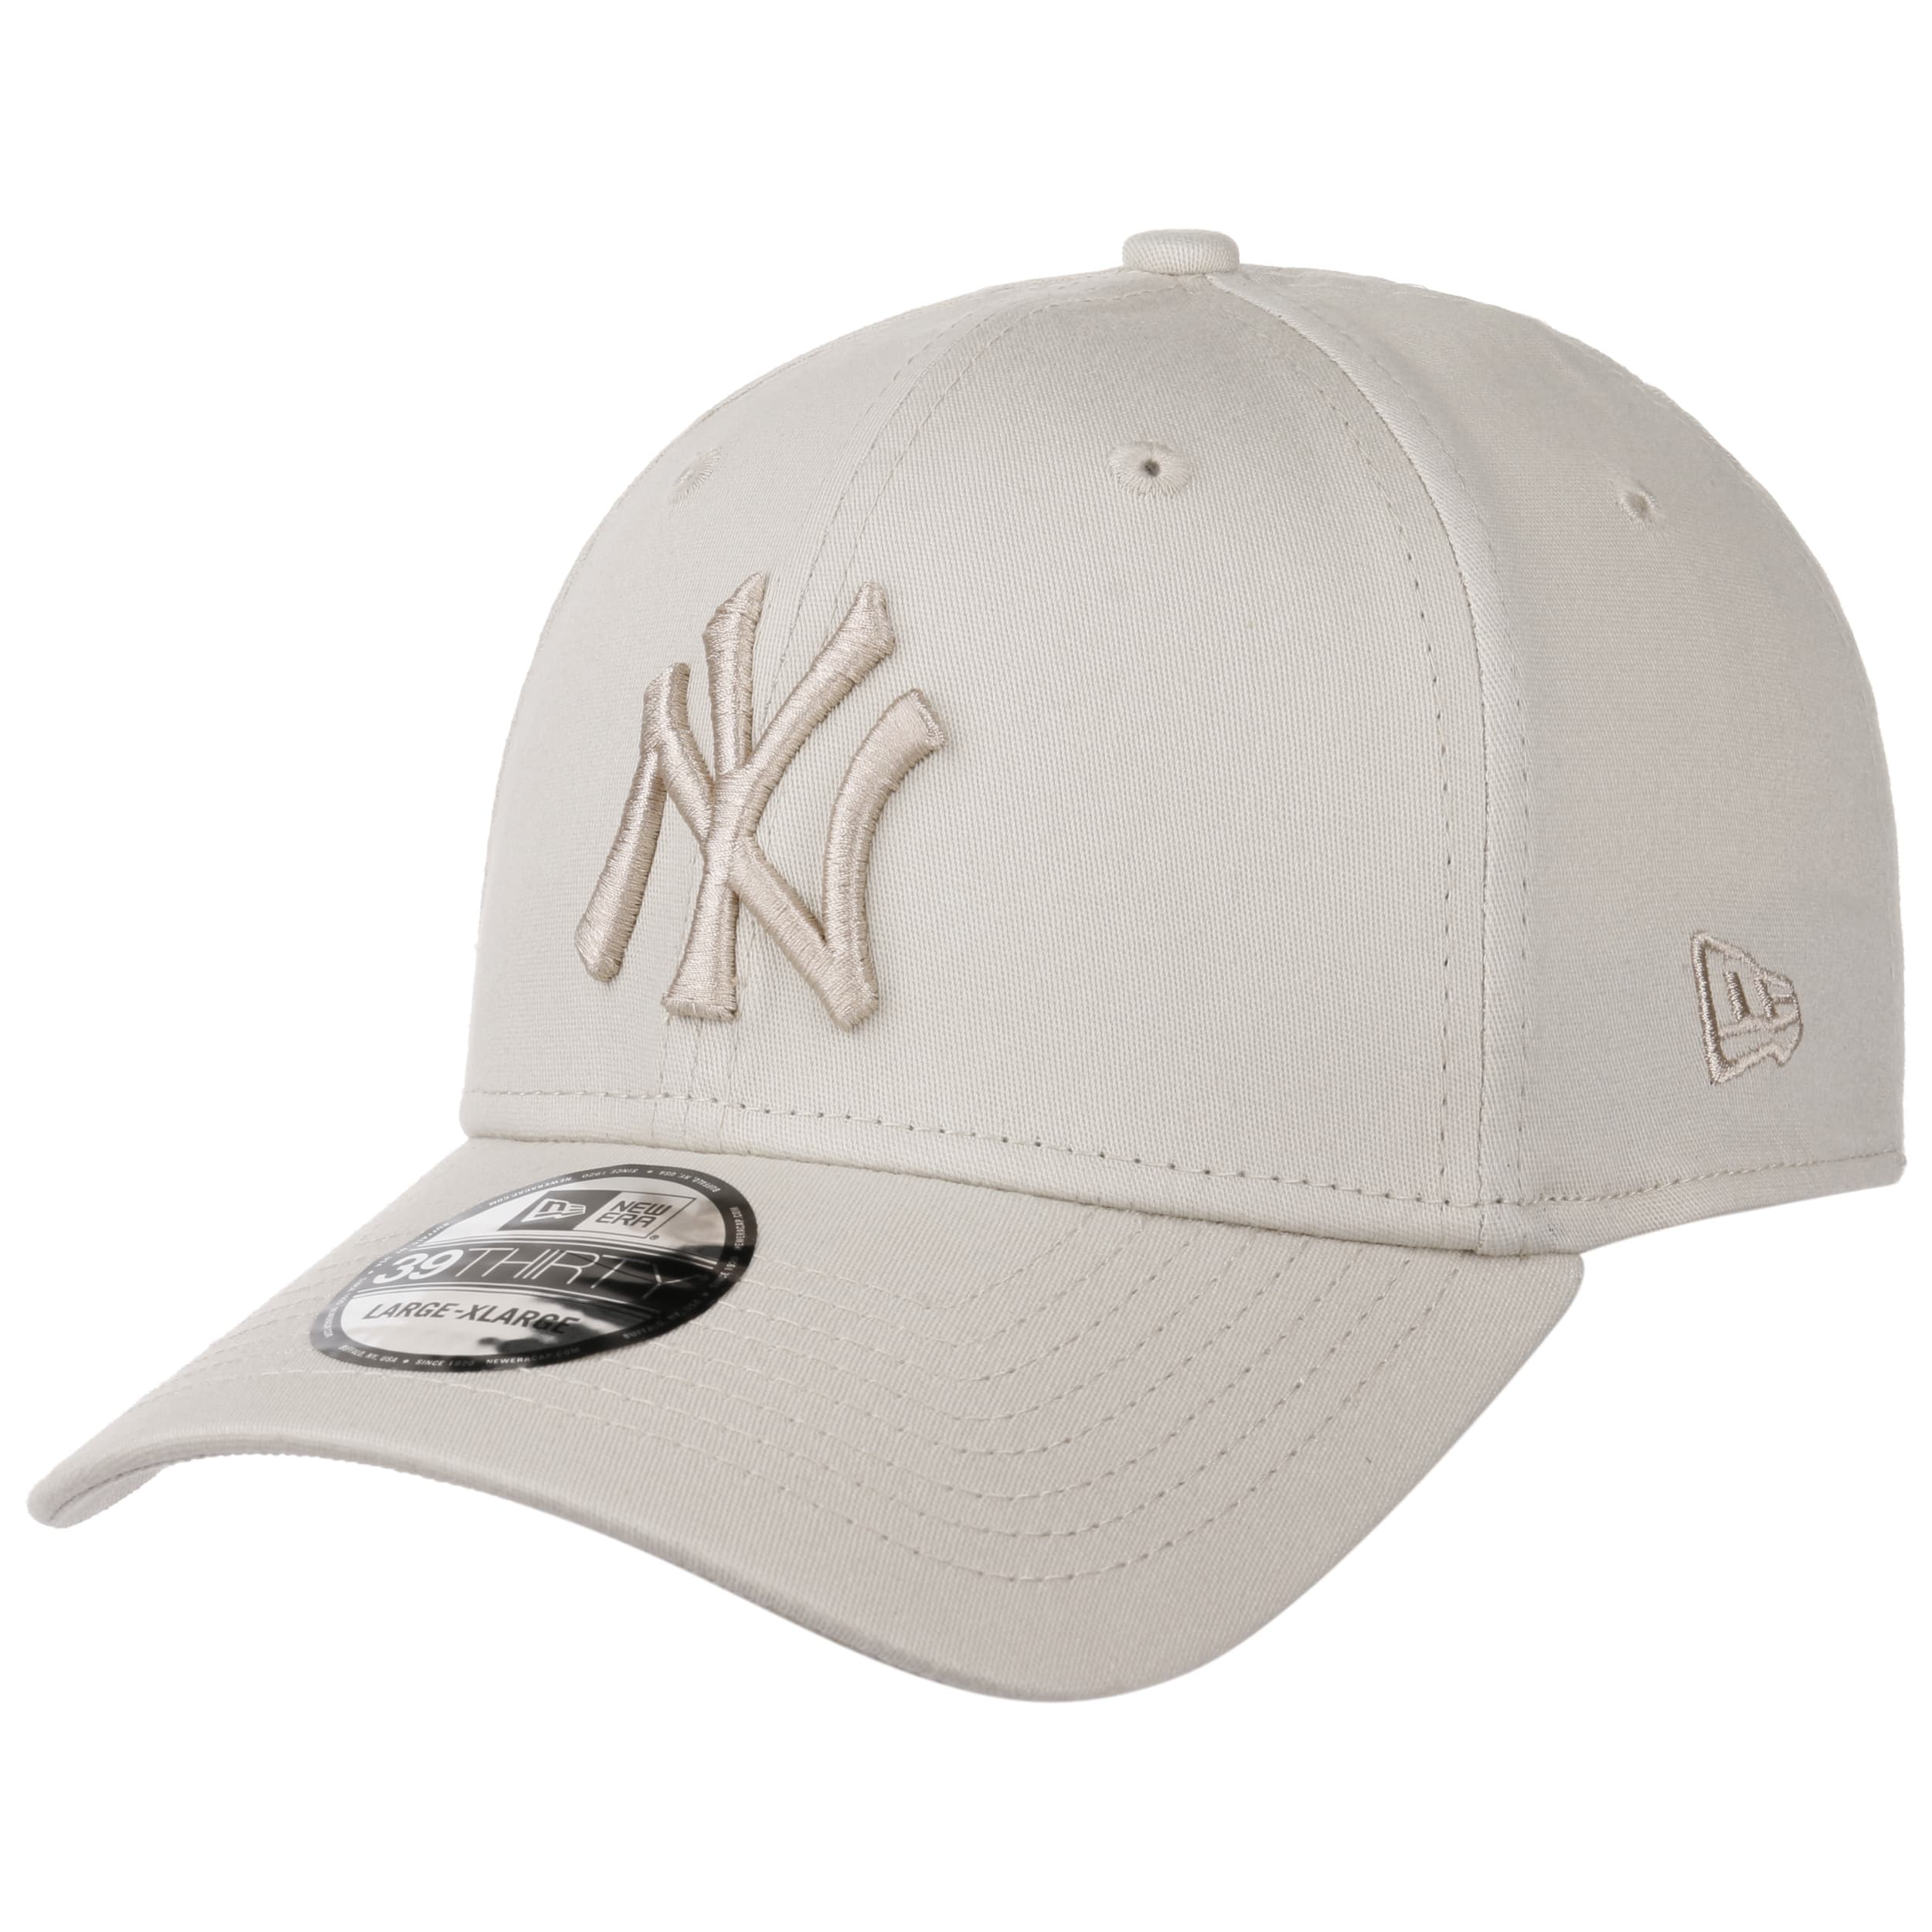 Casquette 39Thirty Uni Yankees by New Era